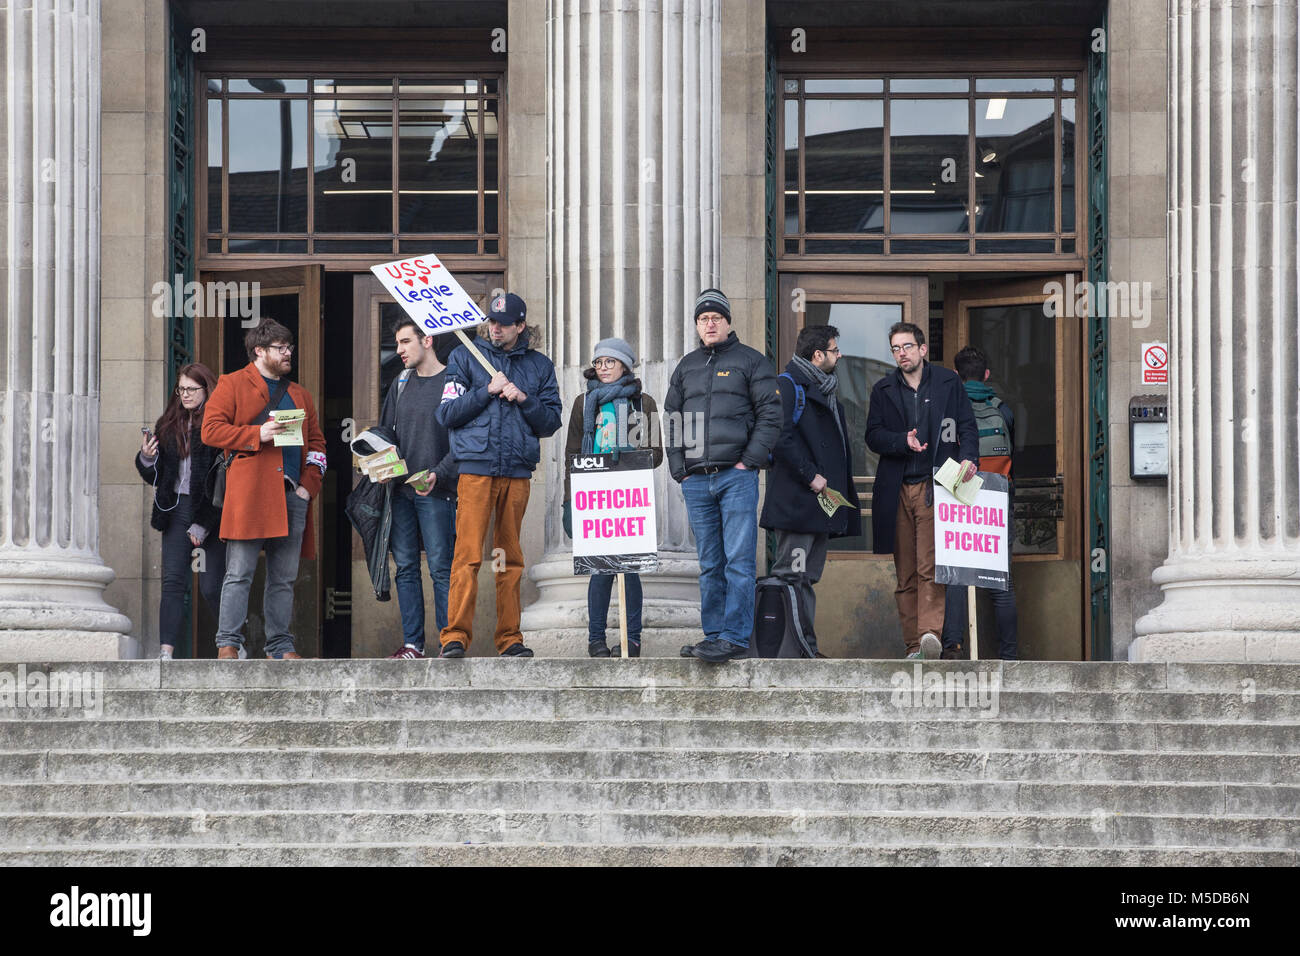 Leeds, UK -22February 2018. Members of the University and College Union began strike action this morning over proposed pension changes. Members were out in force handing out leaflets at every entrance to the university campus including those pictured here on the steps of the Parkinson Building. Credit: James Copeland/Alamy Live News Stock Photo